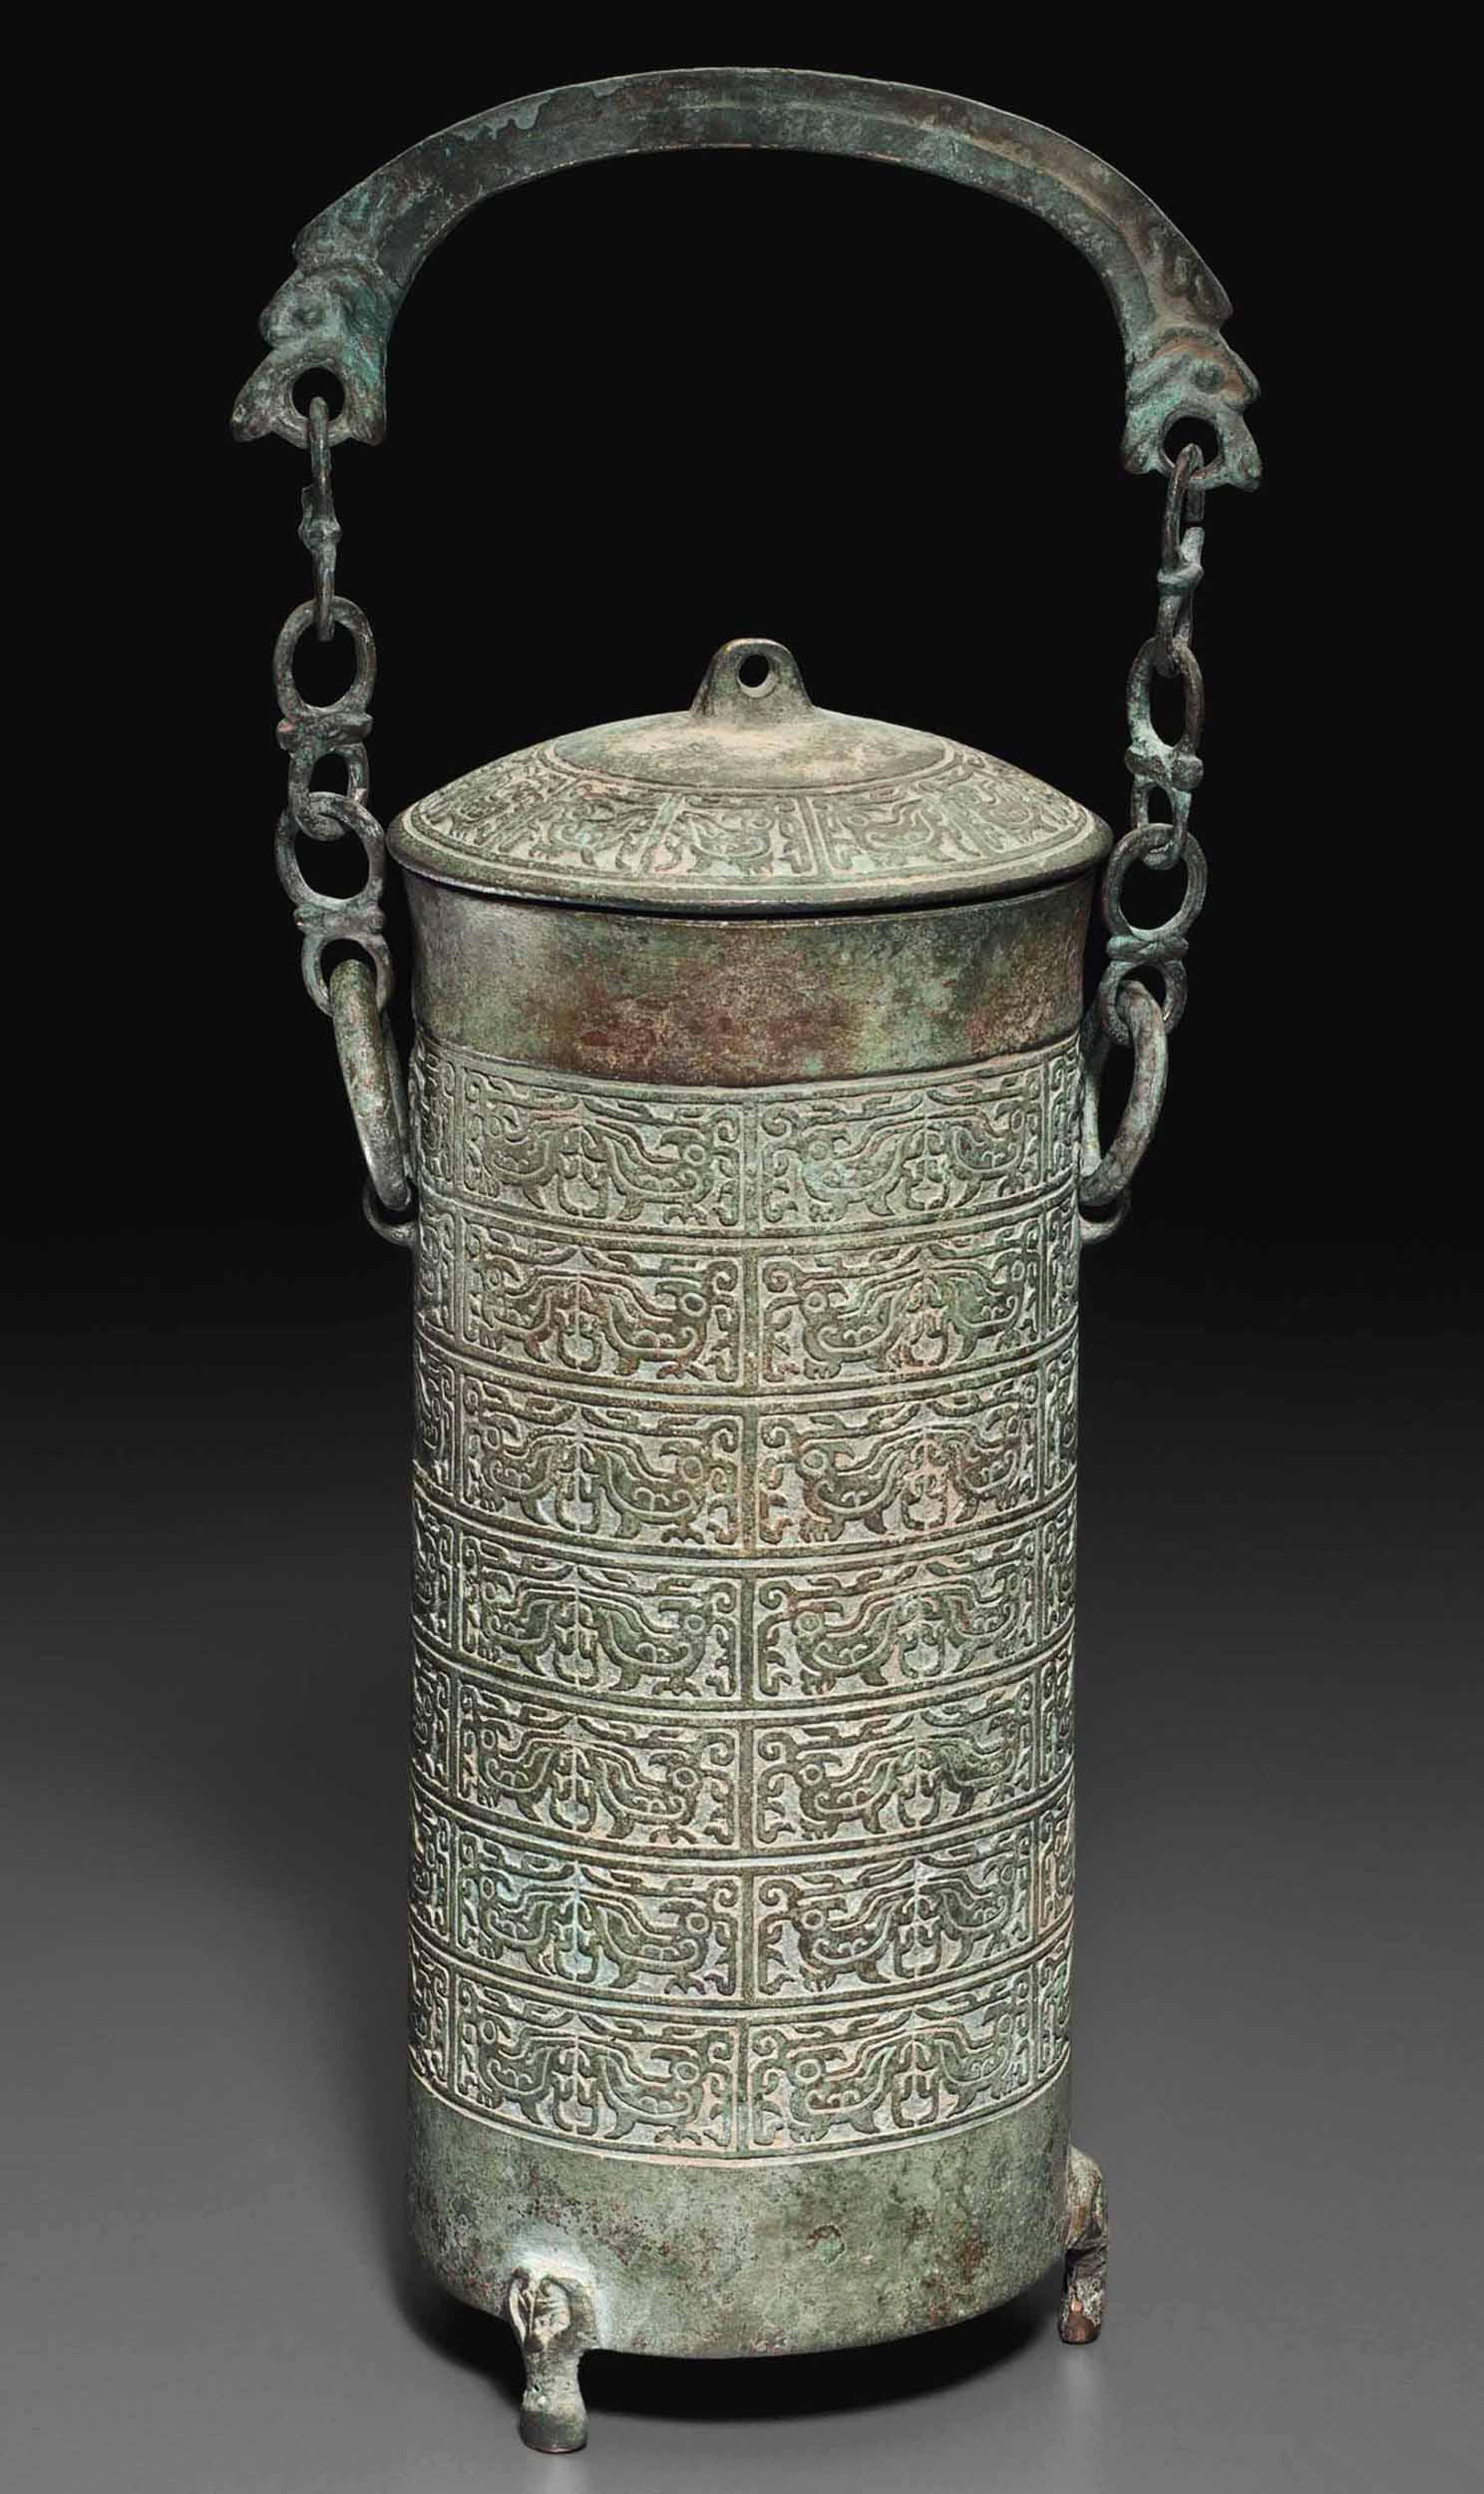 Bronze cylinder on three legs, with animal textures. China, Eastern Zhou dynasty, 770-356 BC.jpg